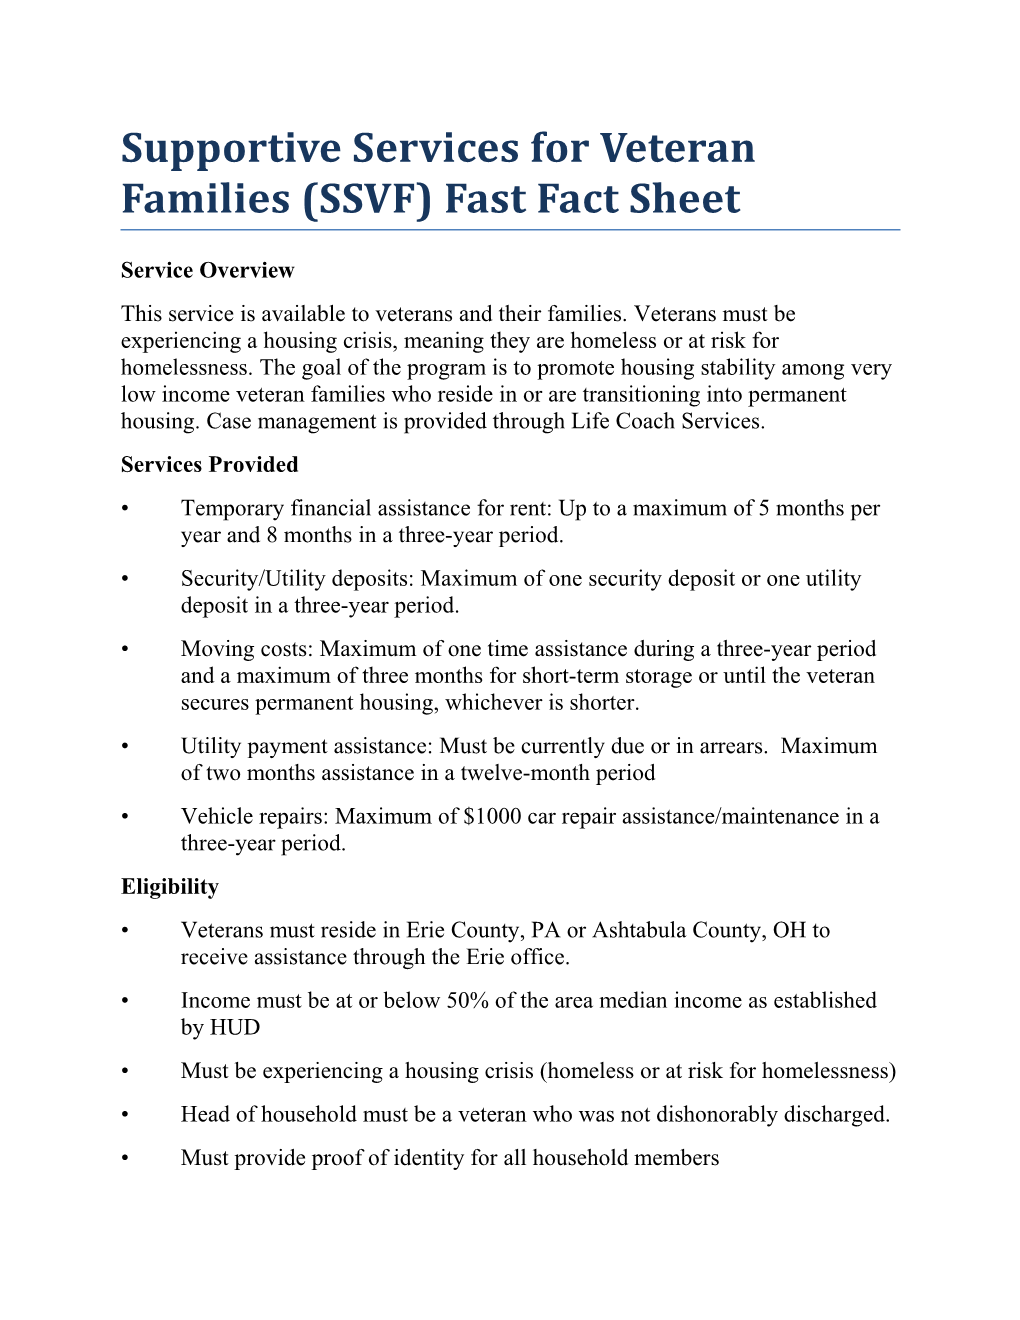 Supportive Services for Veteran Families (SSVF) Fast Fact Sheet